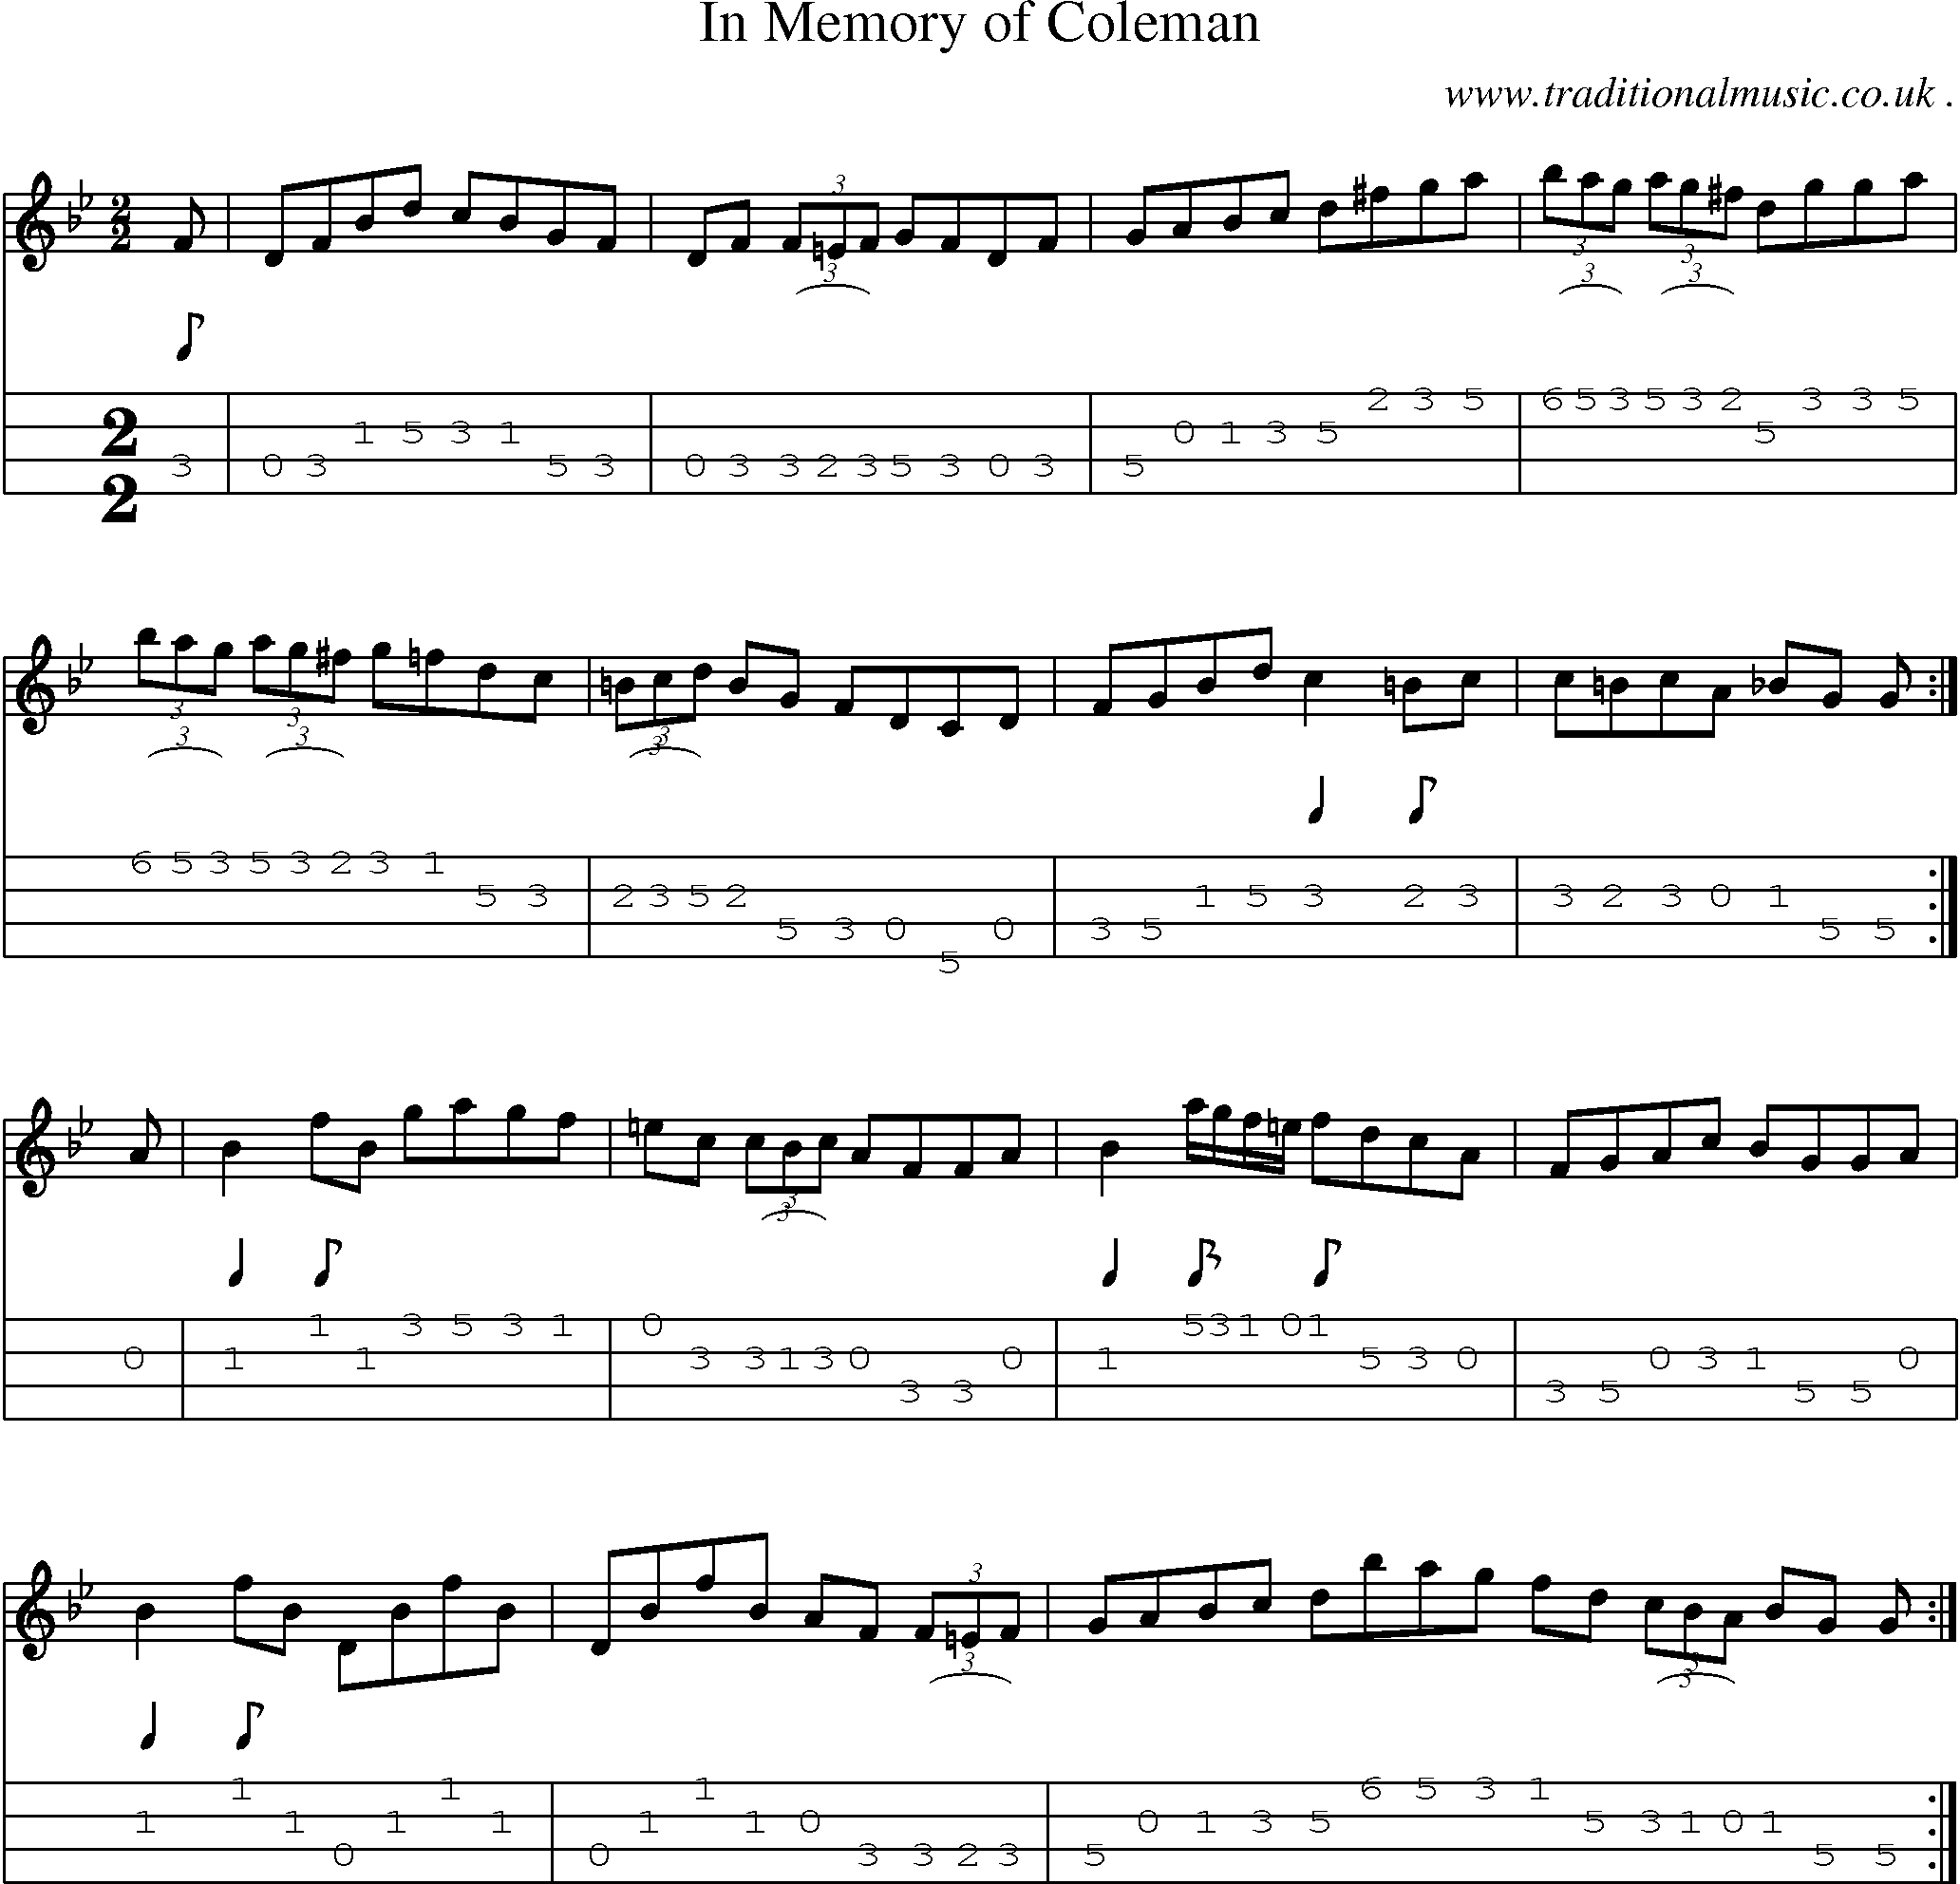 Sheet-music  score, Chords and Mandolin Tabs for In Memory Of Coleman